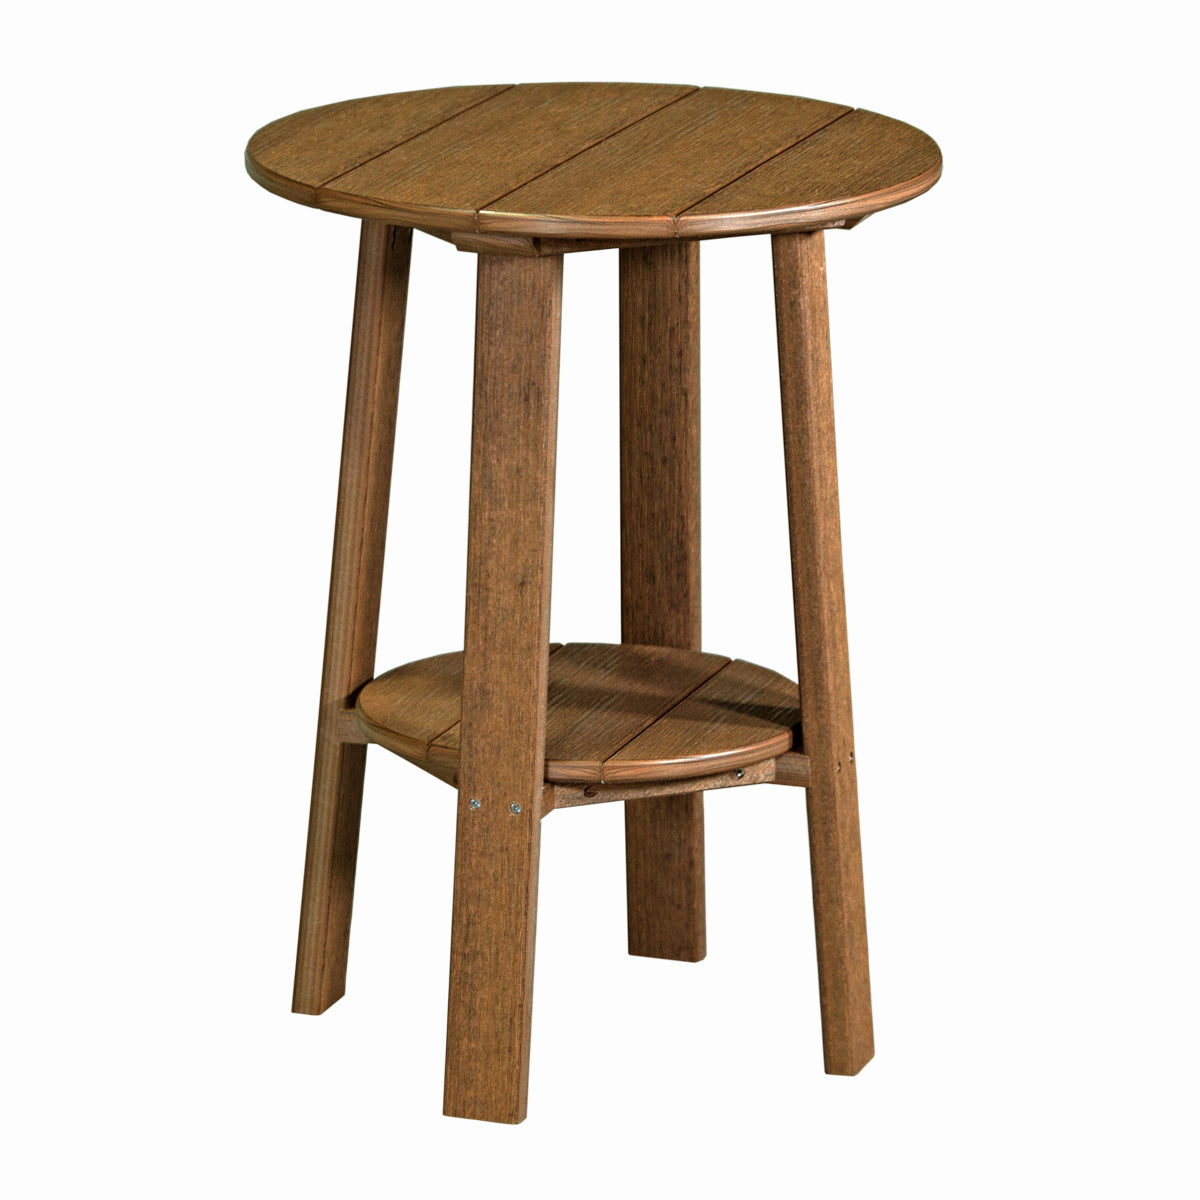 Luxcraft Deluxe End Table 28″ PEDT28